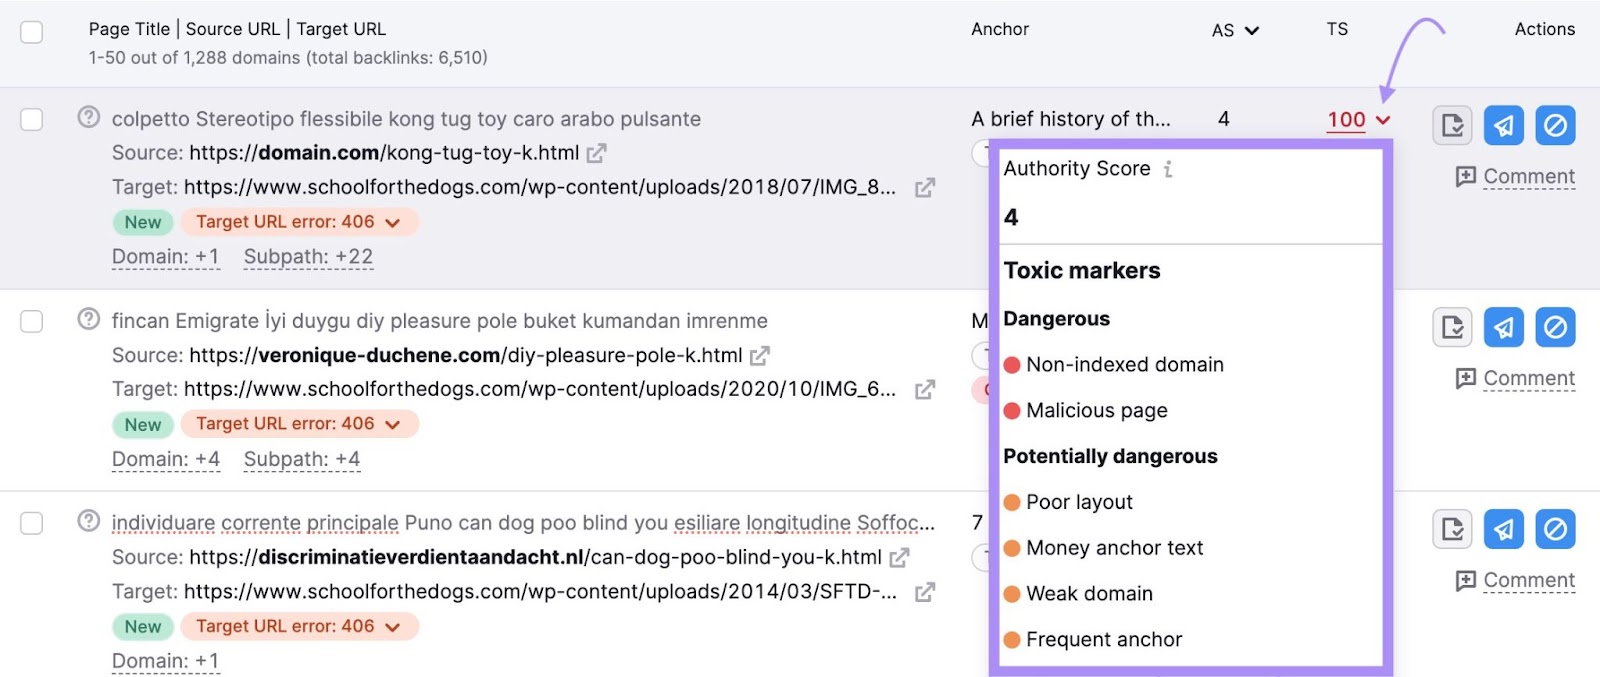 "Toxic markers" section shown for a website in Backlink Audit report